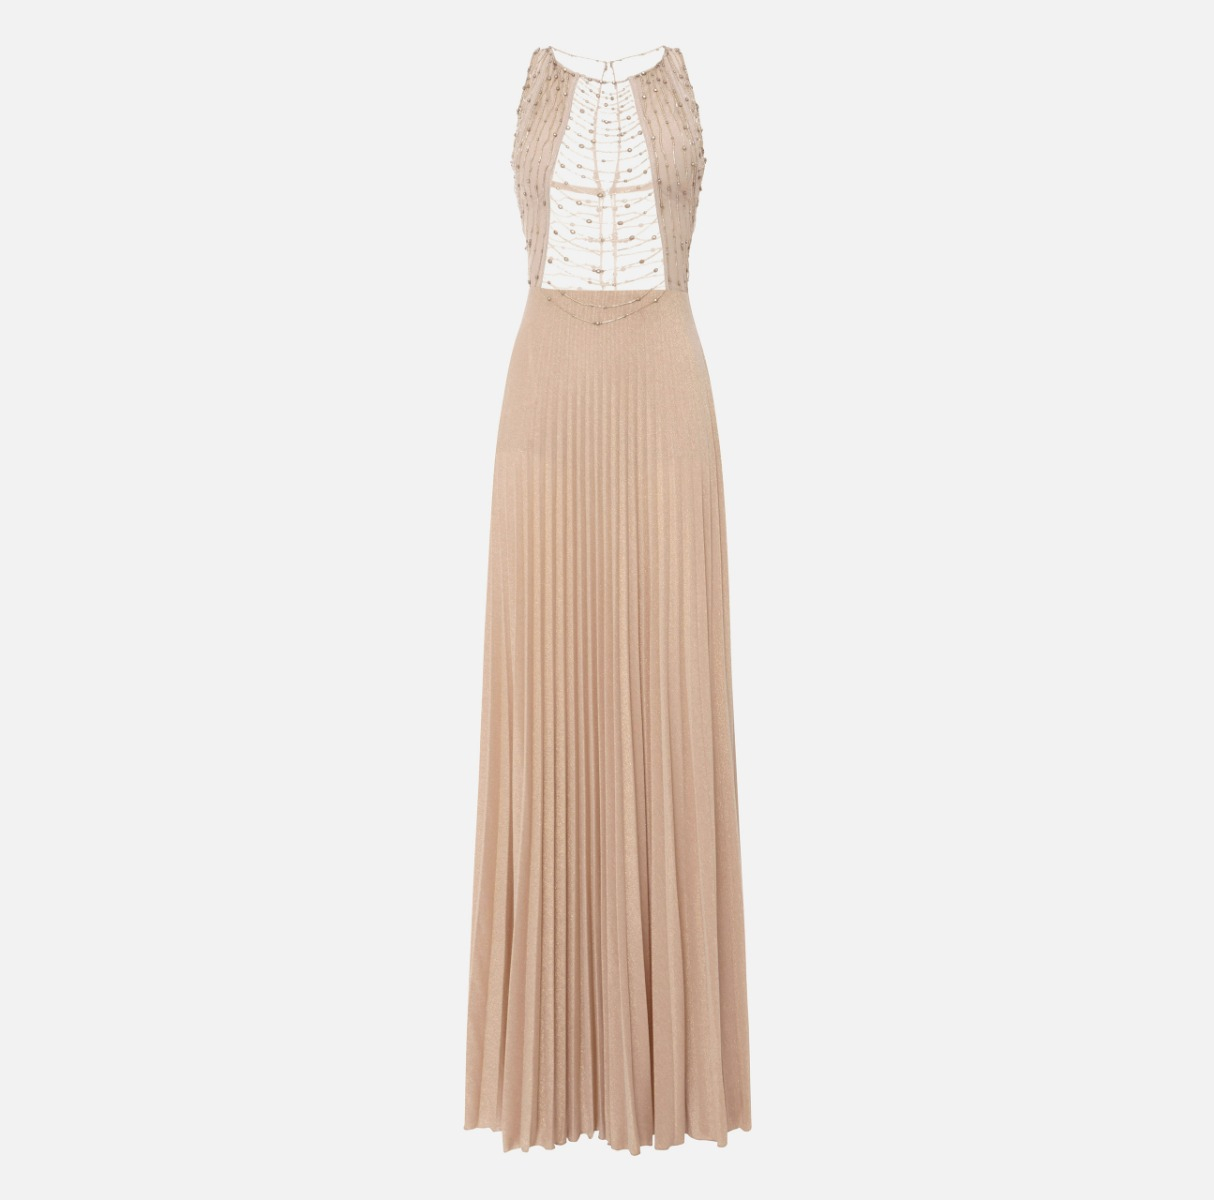 Red Carpet dress in embroidered tulle and jersey - Elisabetta Franchi